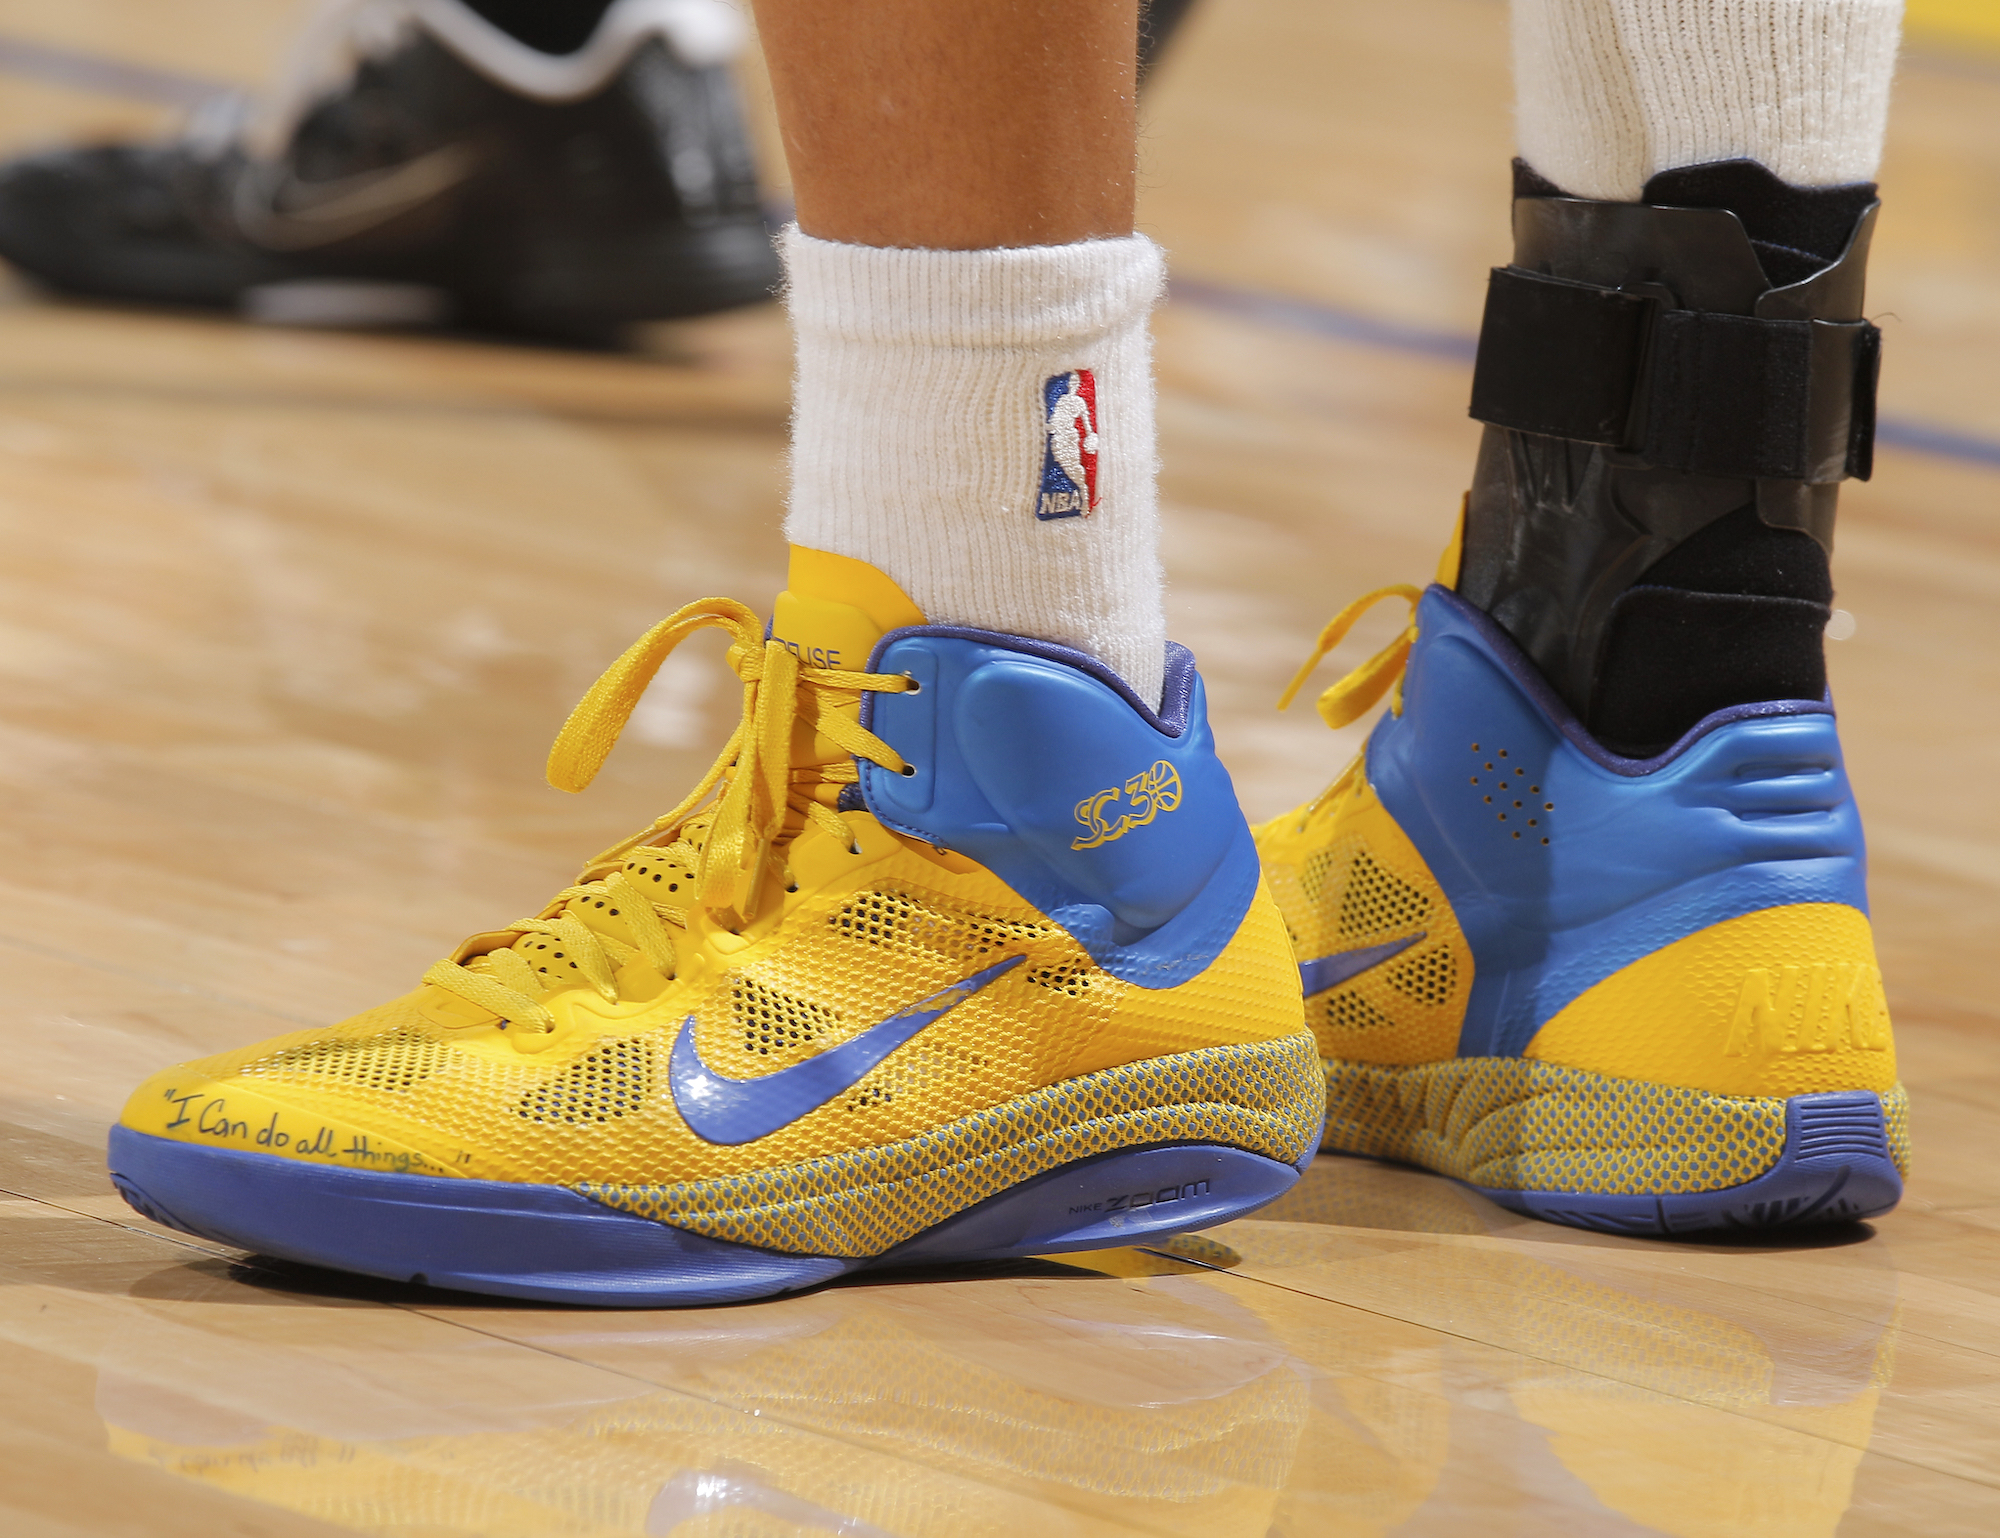 Rare, Game-worn Stephen Curry Nikes to be Made Available for IPO - Boardroom